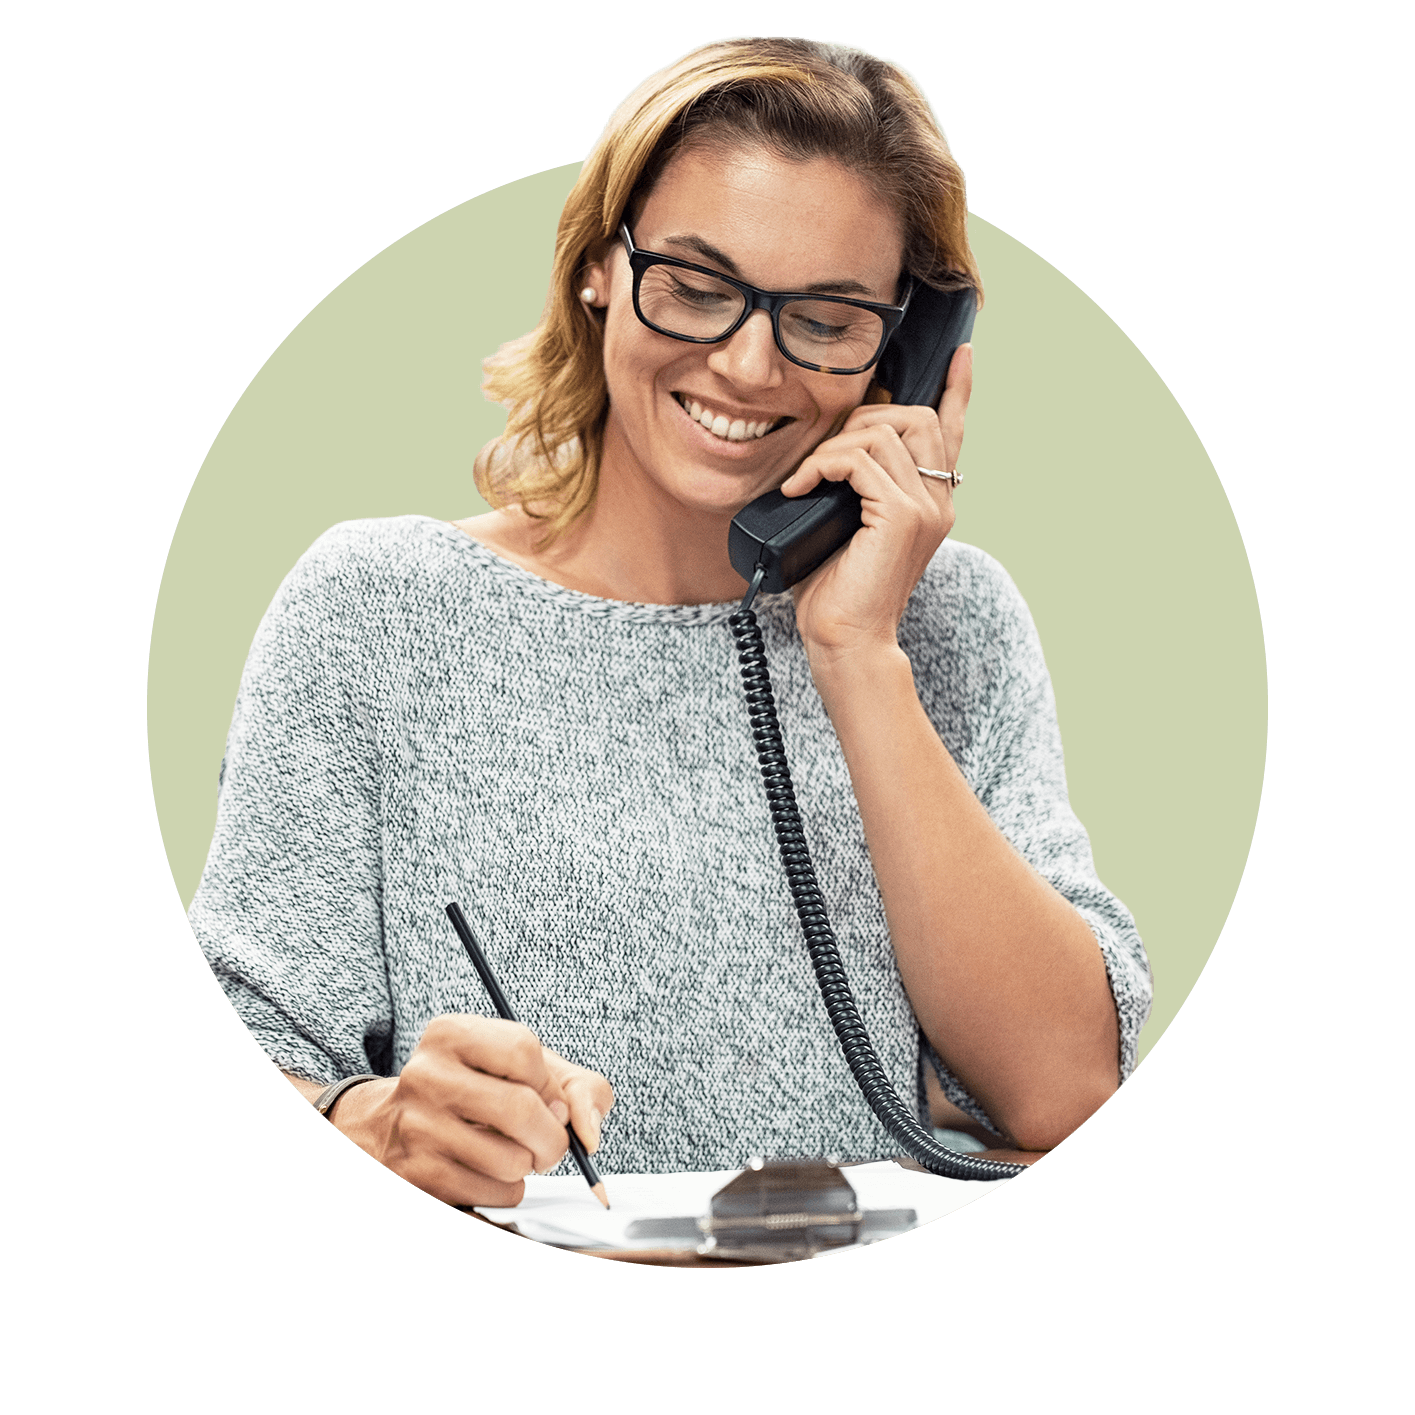 Professional woman smiling whilst on the phone and writing notes on a clipboard